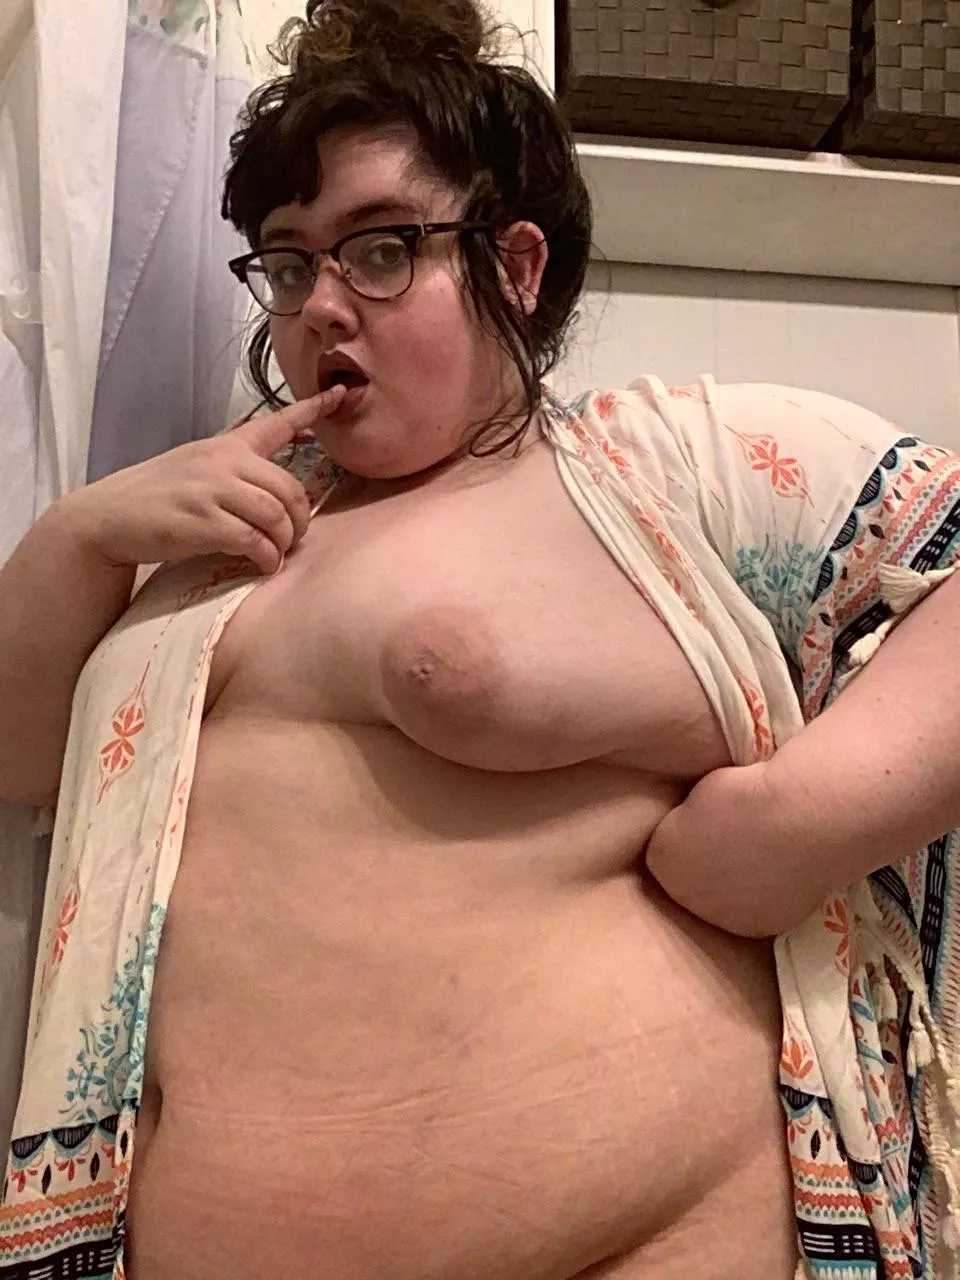 Tried A New Pose Nudes Gonewildplus Nude Pics Org